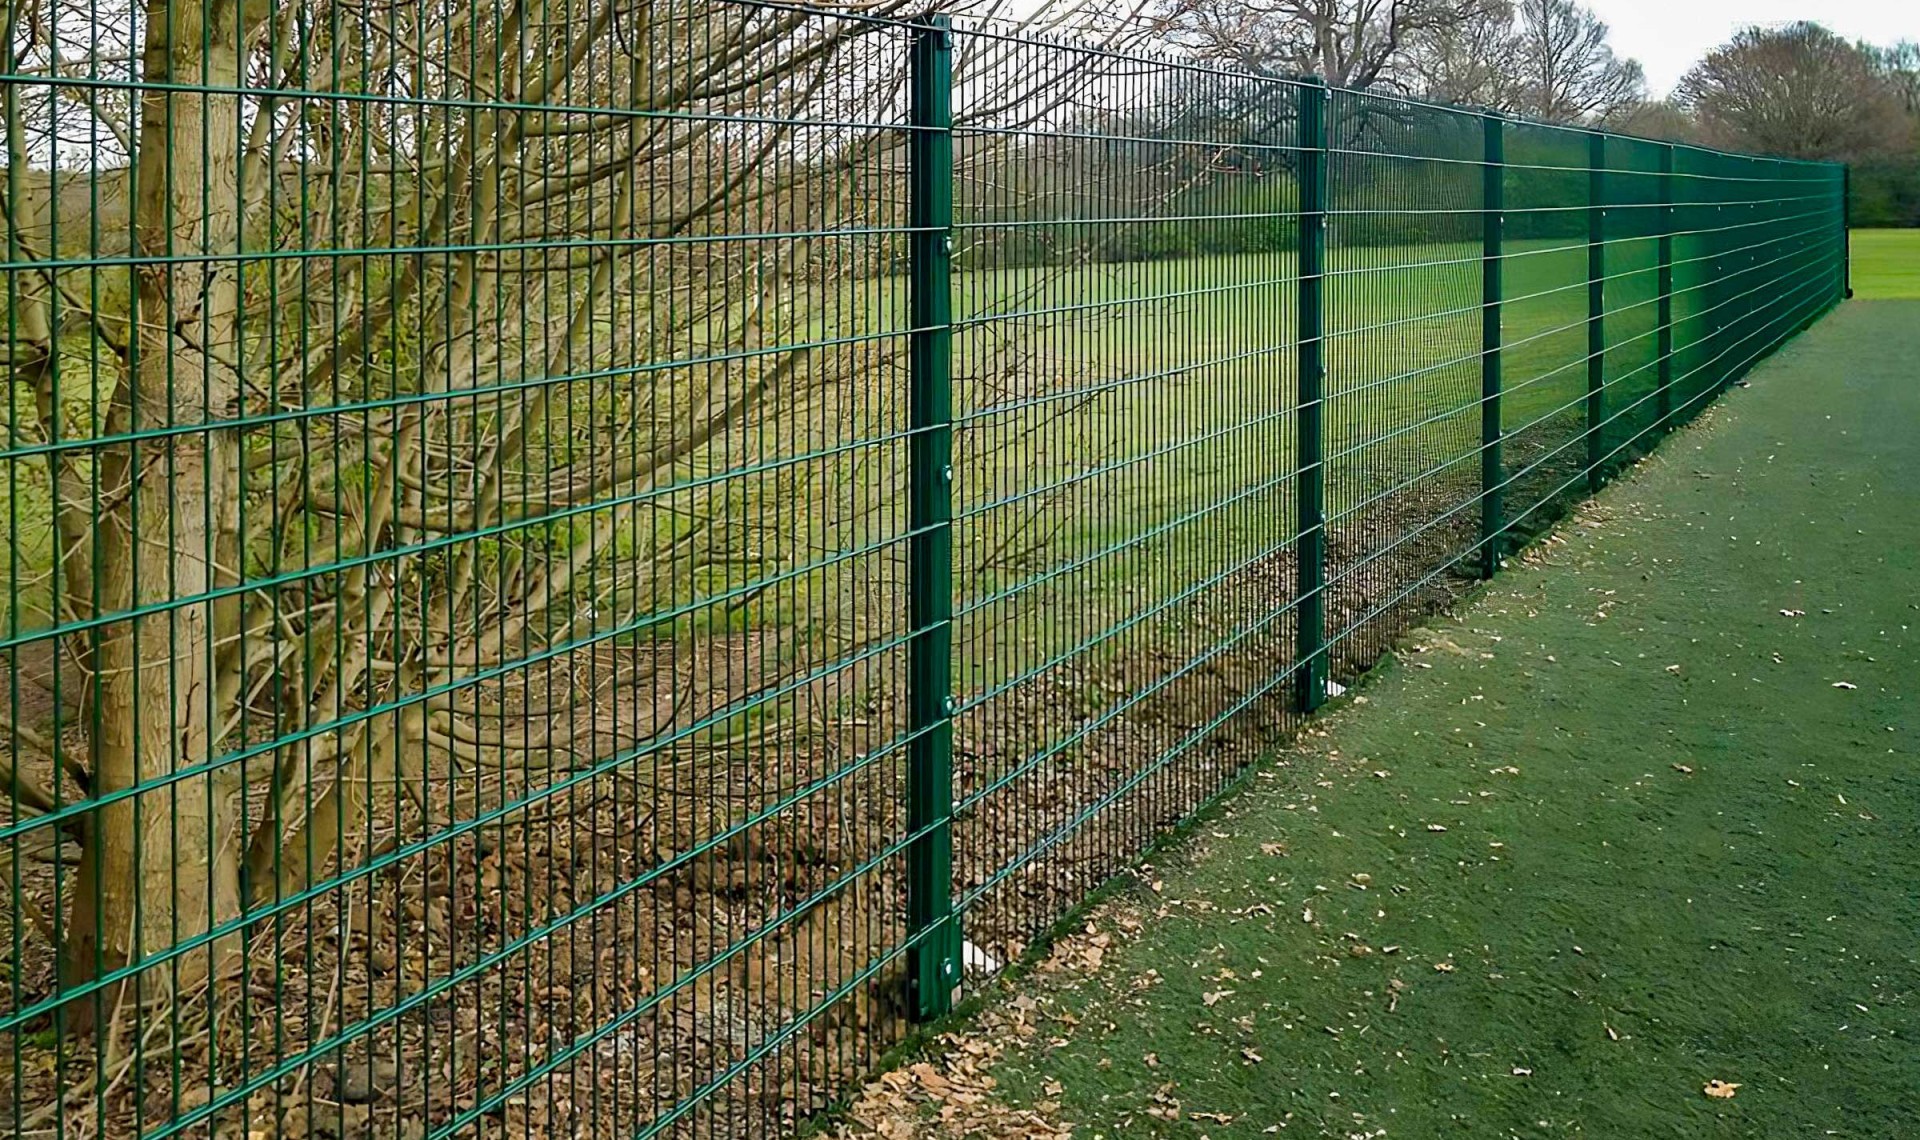 Green v mesh fencing around large fielded area.